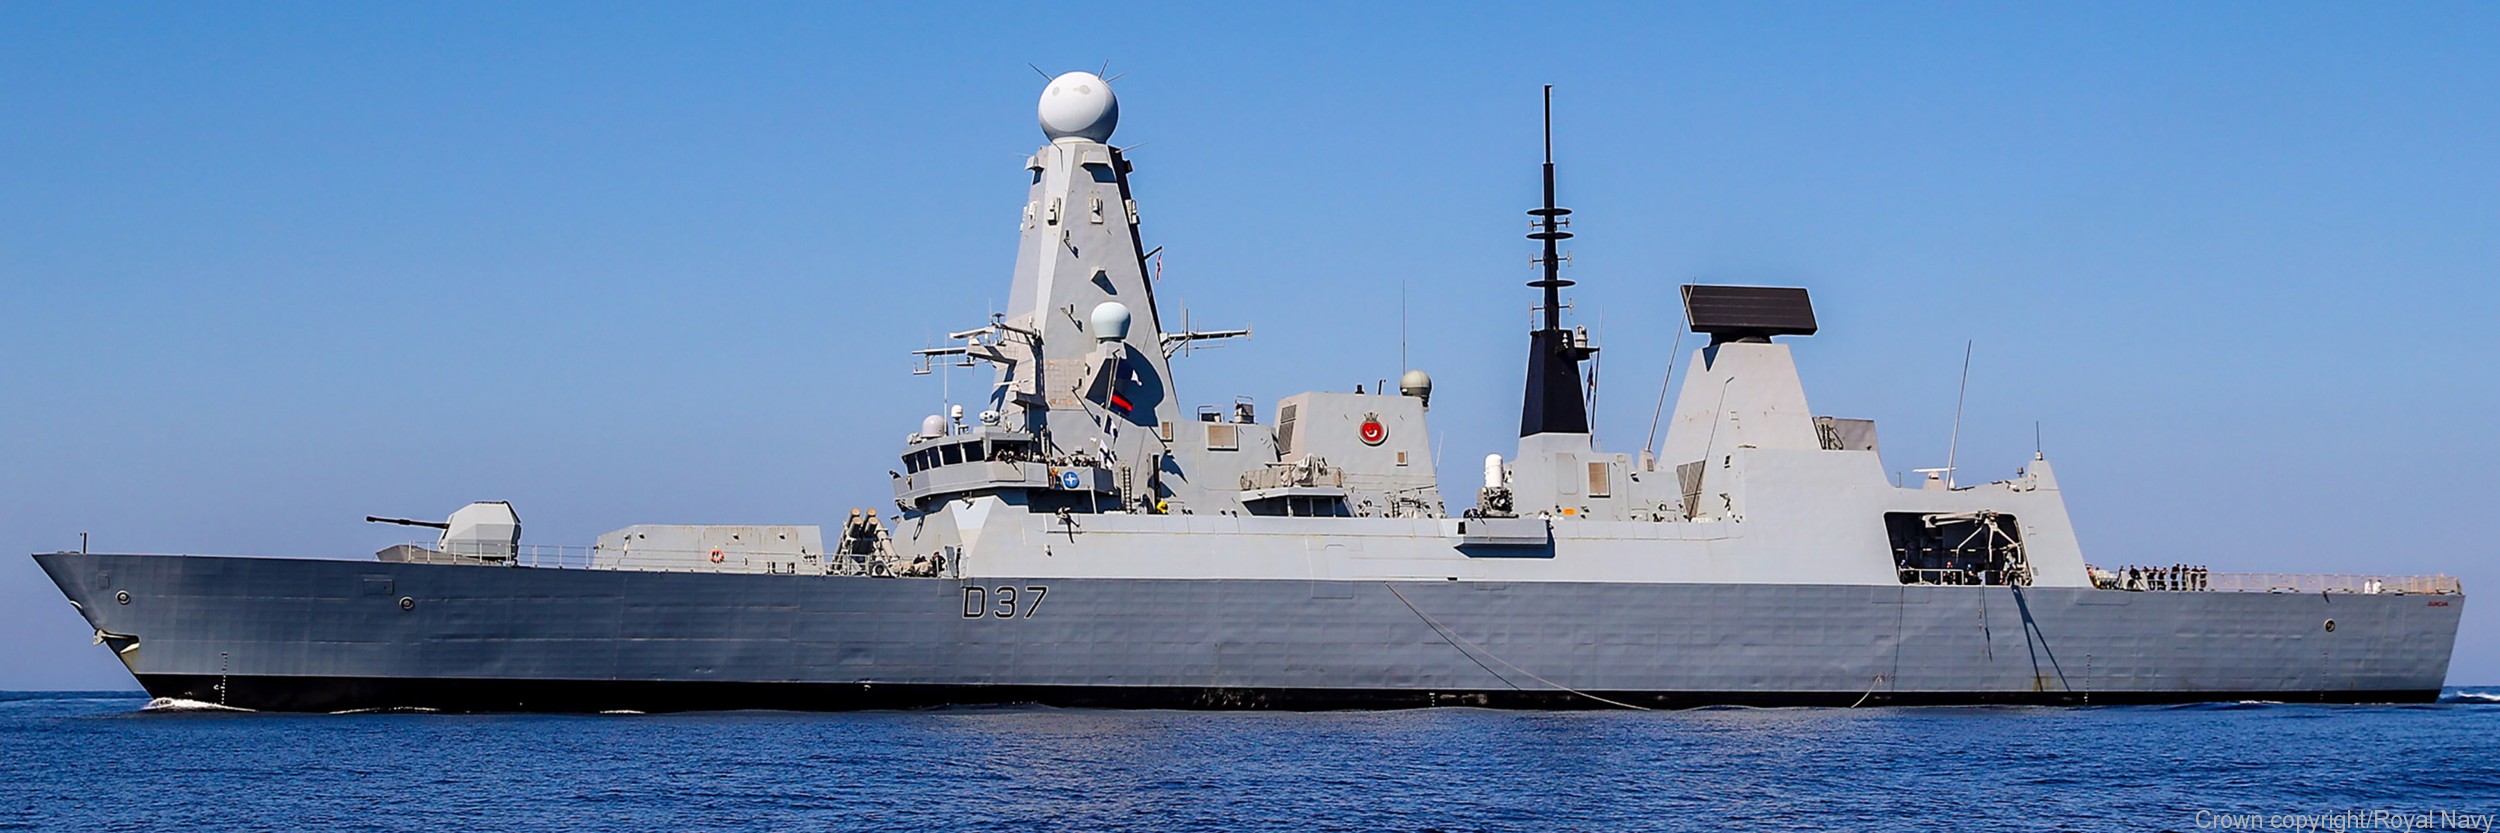 d37 hms duncan d-37 type 45 daring class guided missile destroyer ddg royal navy sea viper 46